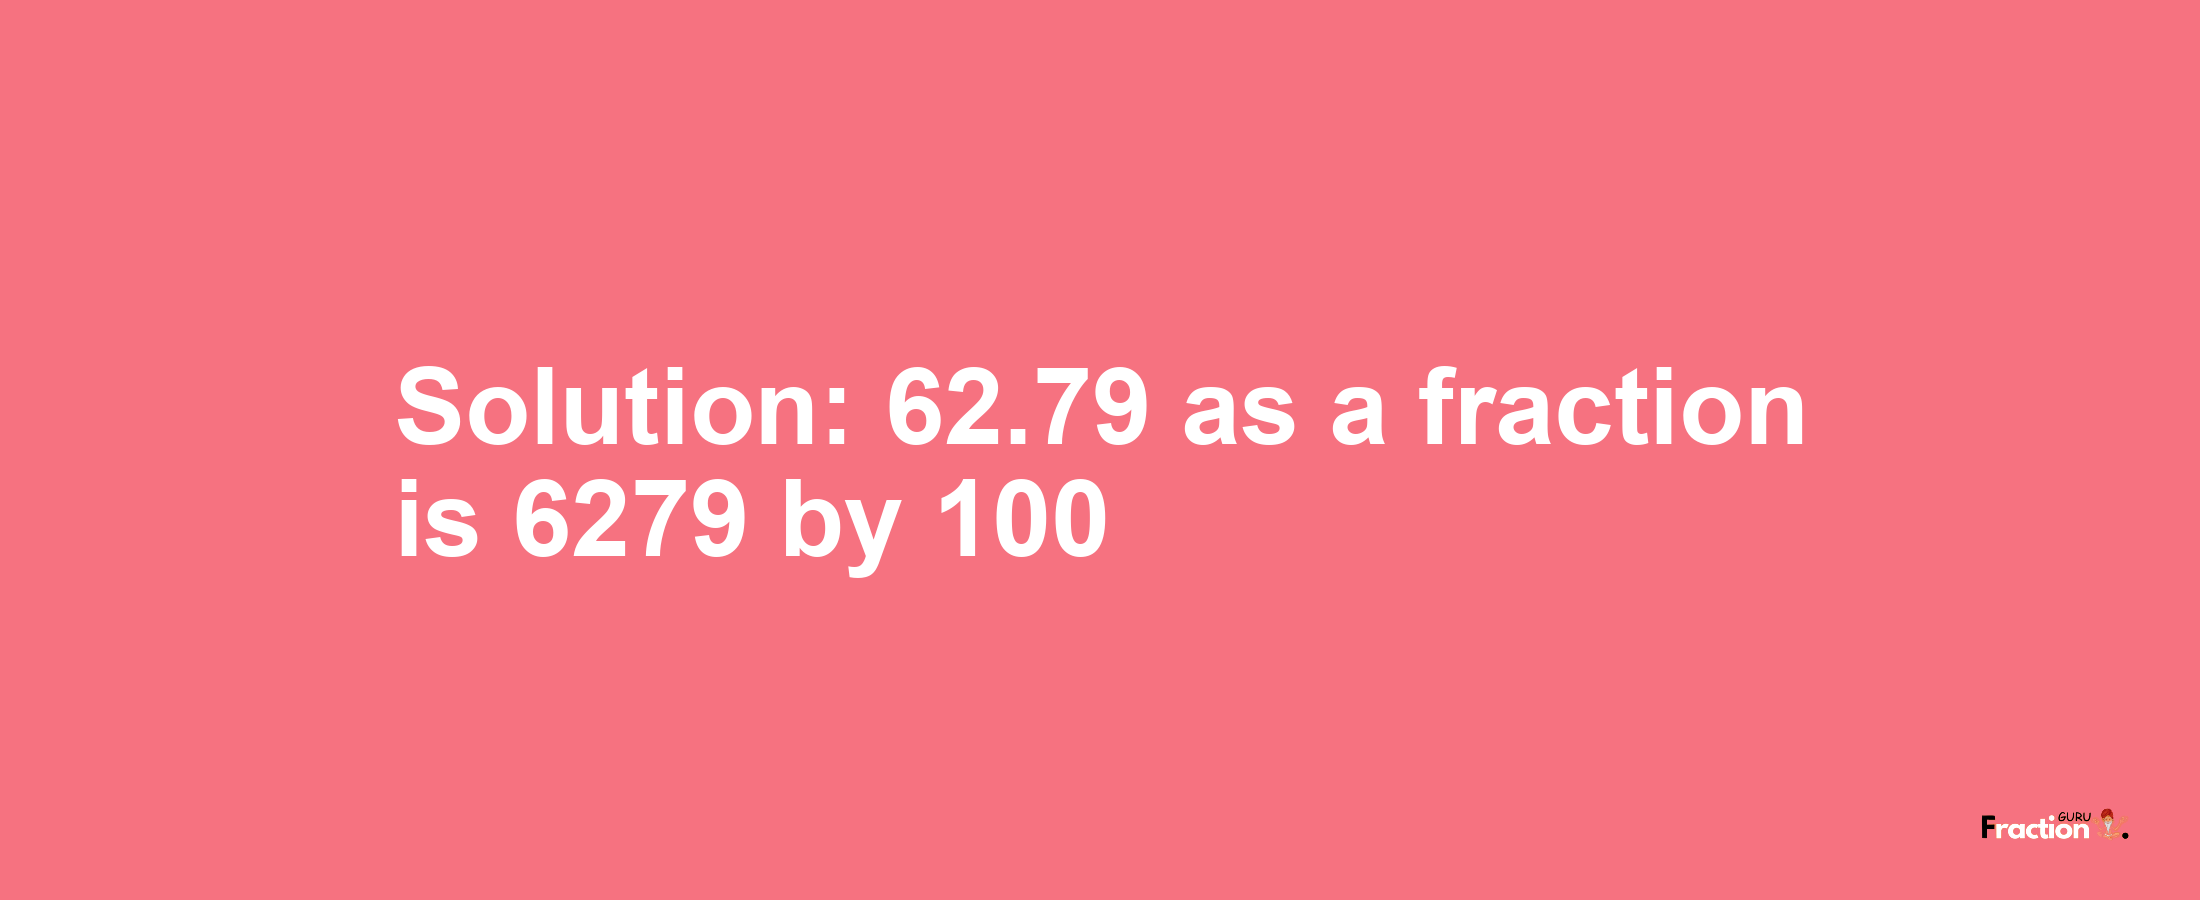 Solution:62.79 as a fraction is 6279/100